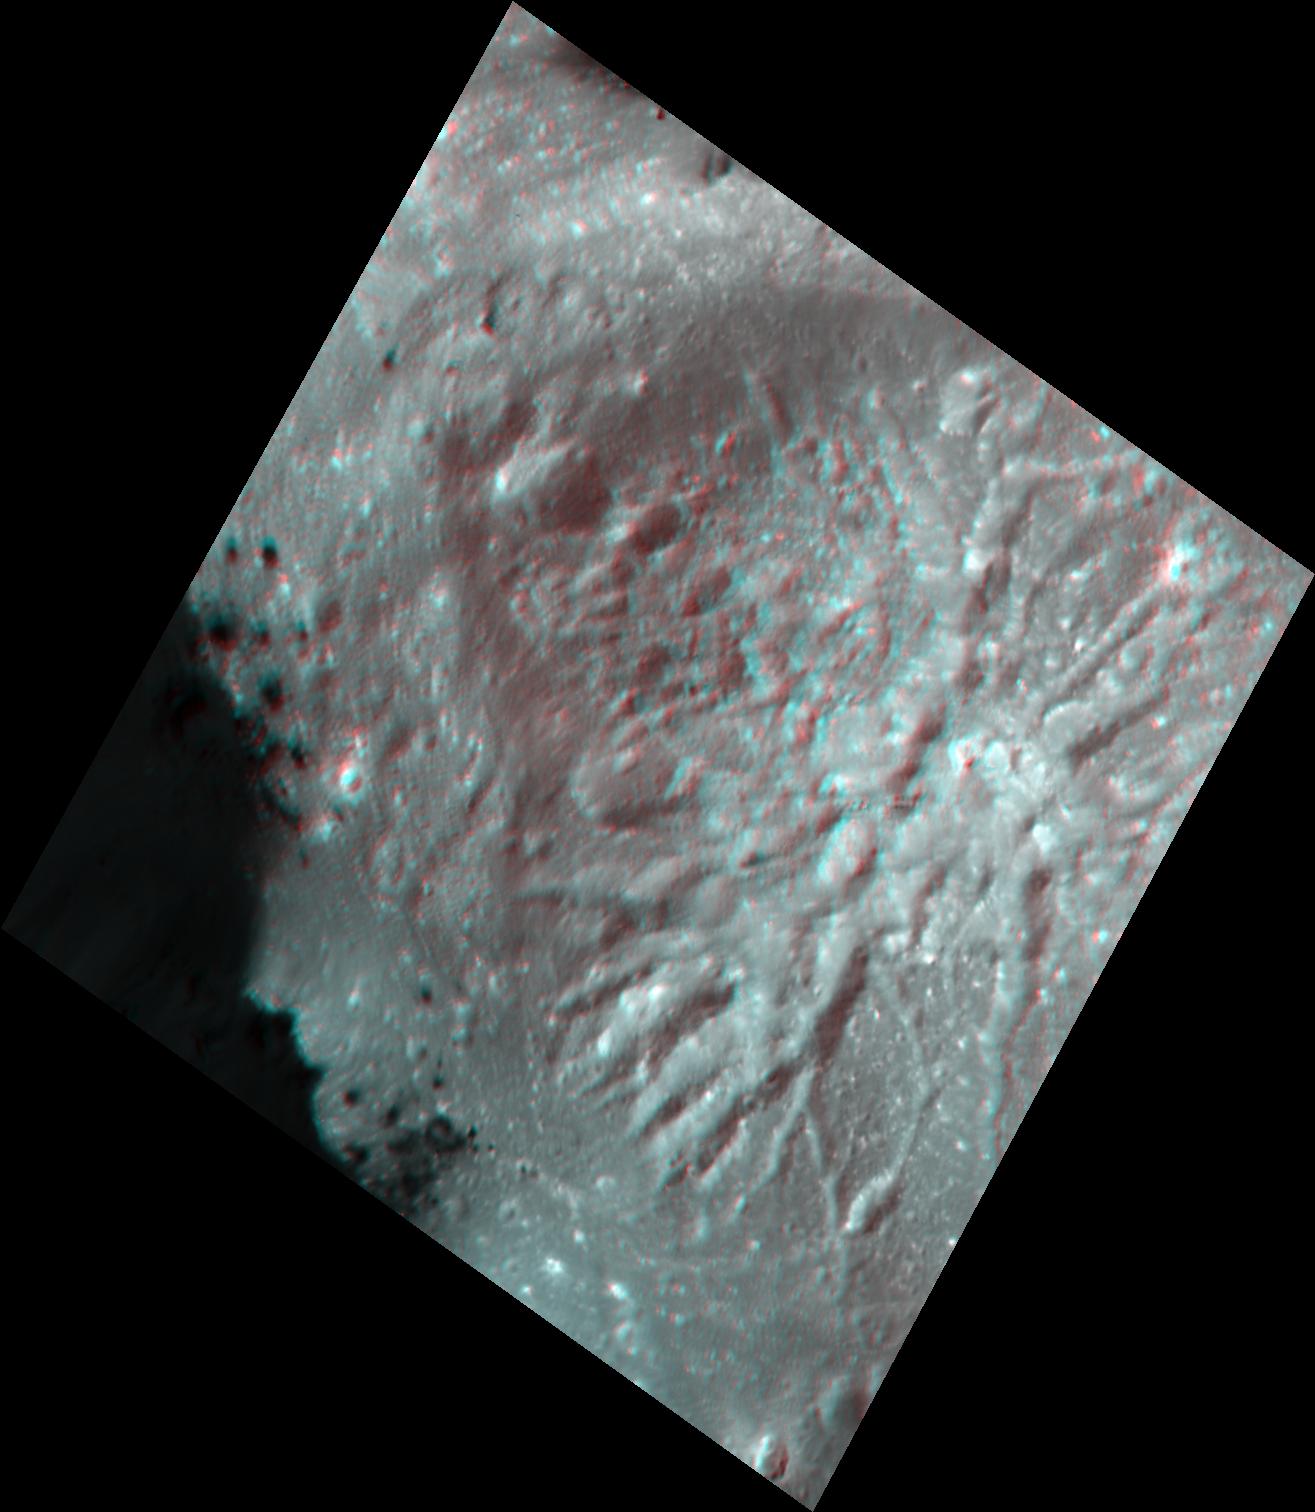 PIA22866: Cerealia Facula Pit and Dome in 3-D